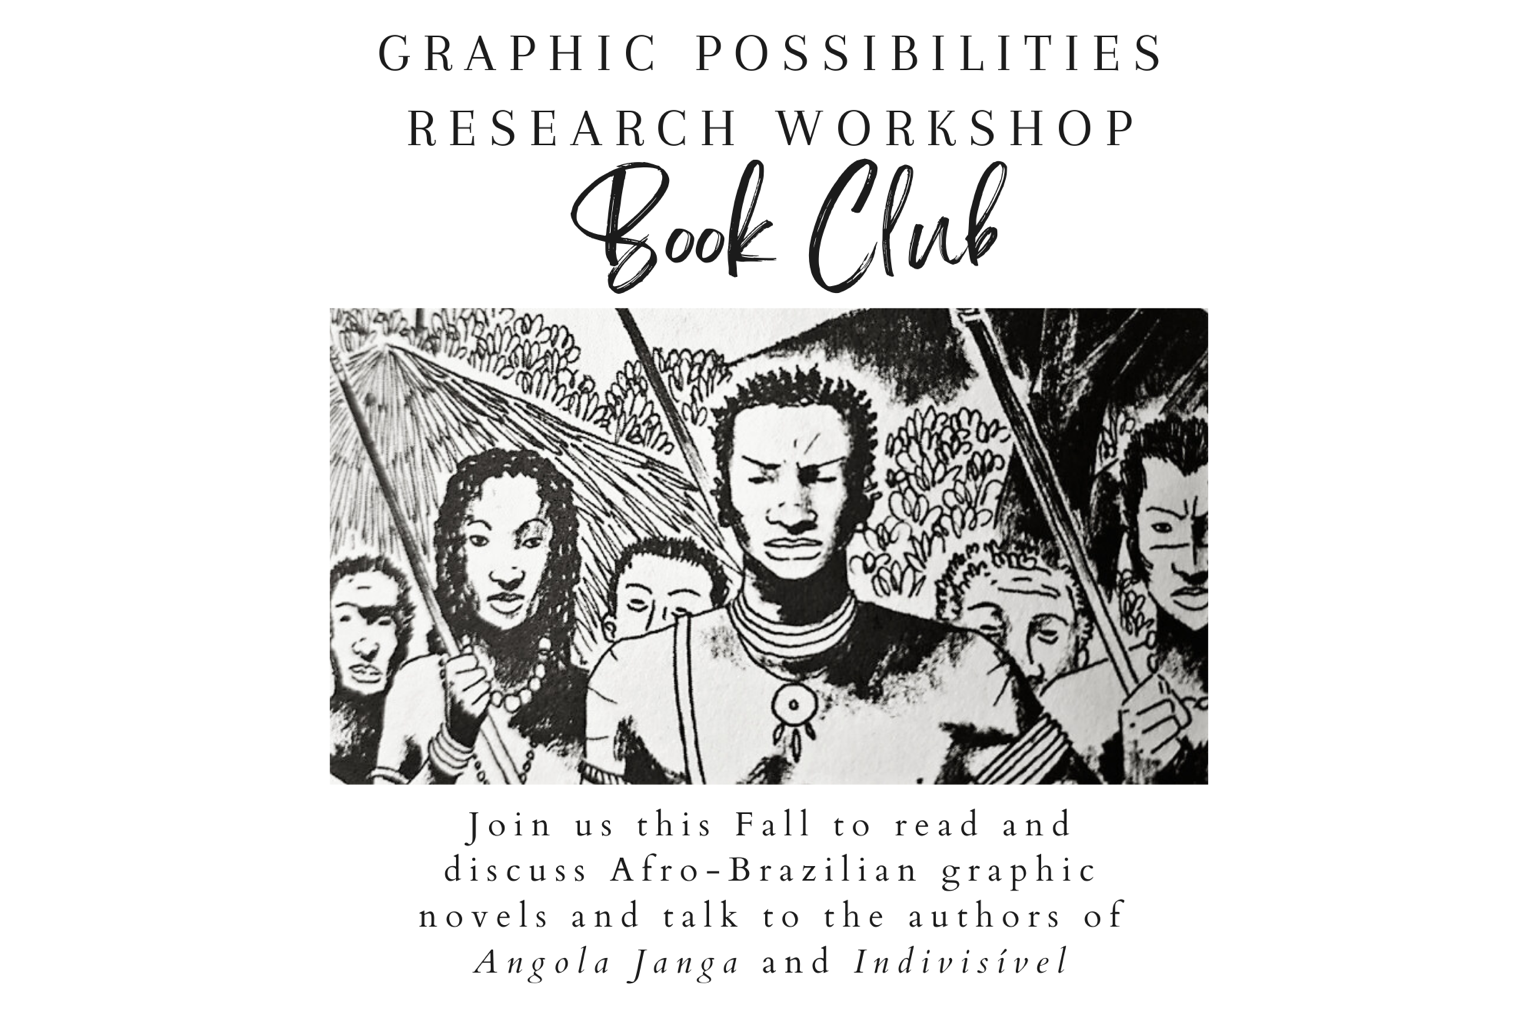 On a white background features a centered image from the graphic novel Angola Janga. Above the image text reads, " Graphic Possibilities Research Workshop Book Club." While below the image reads," Join us this fall to read and discuss Afro-Brazilian graphic govels and talk to the authors of Angola Janga and Indivisível."